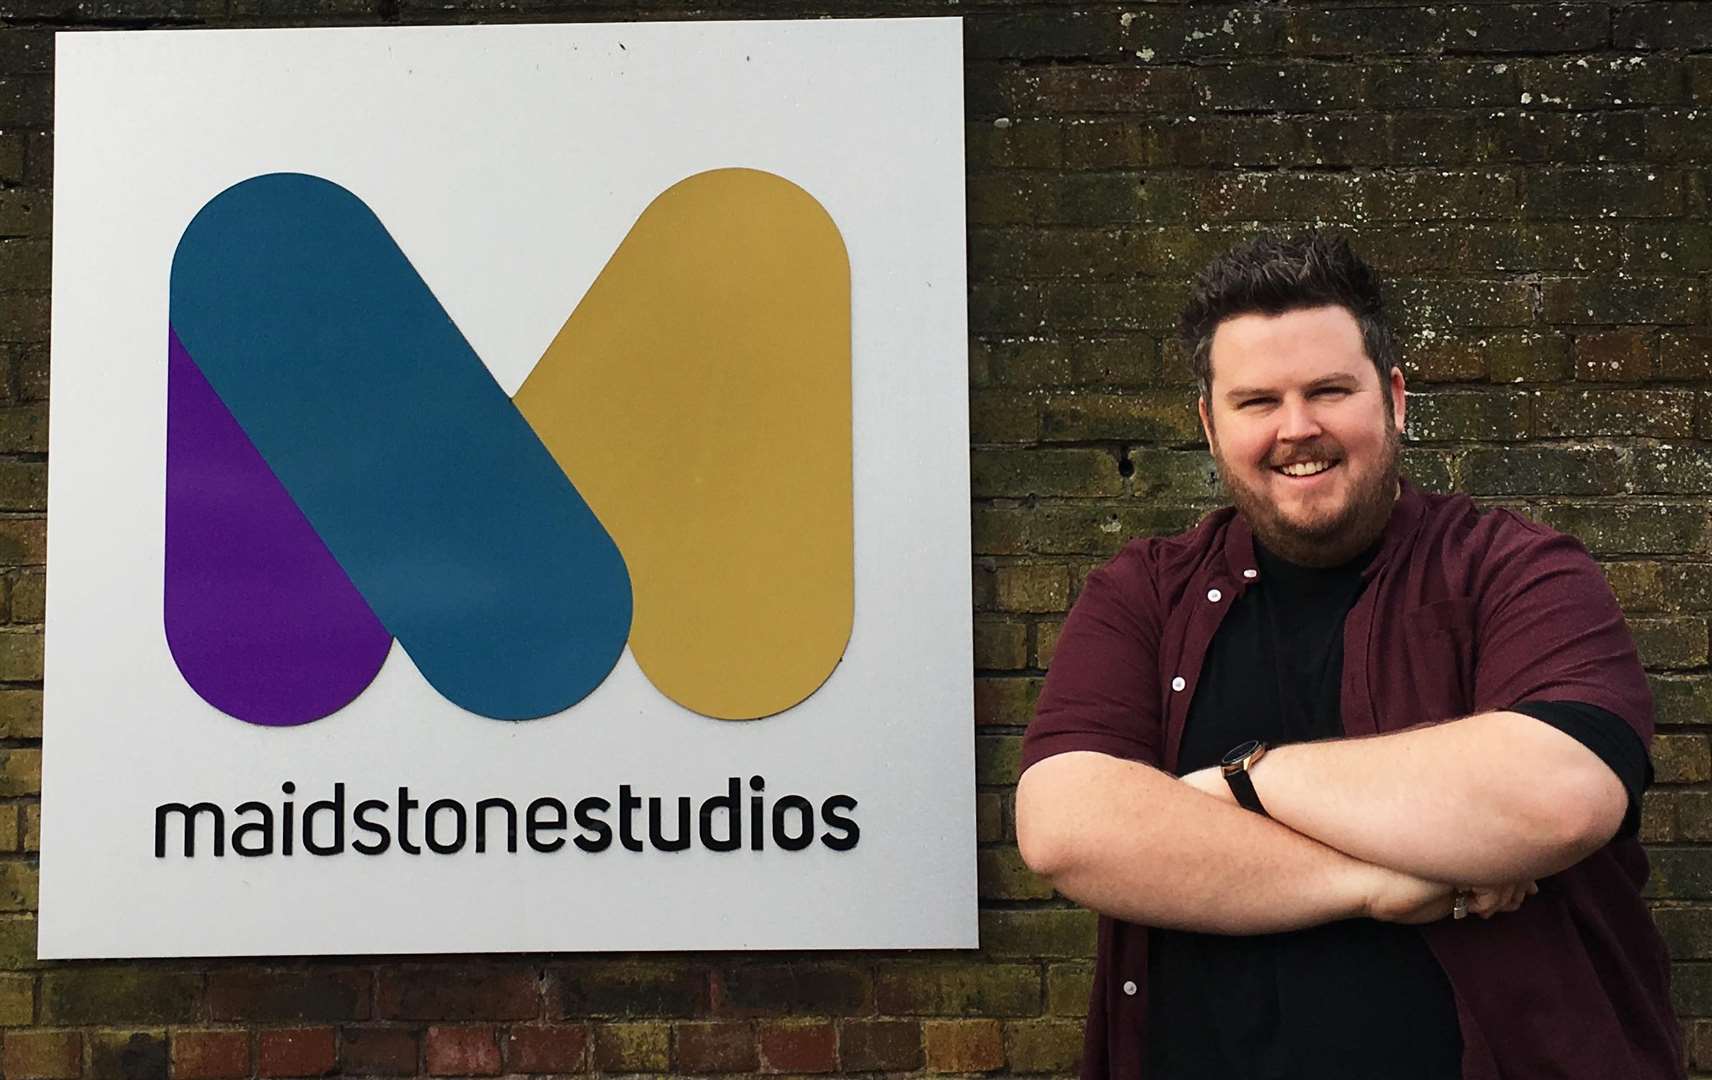 Vexx Group producer Danny Wright is organising the panto at Maidstone Studios